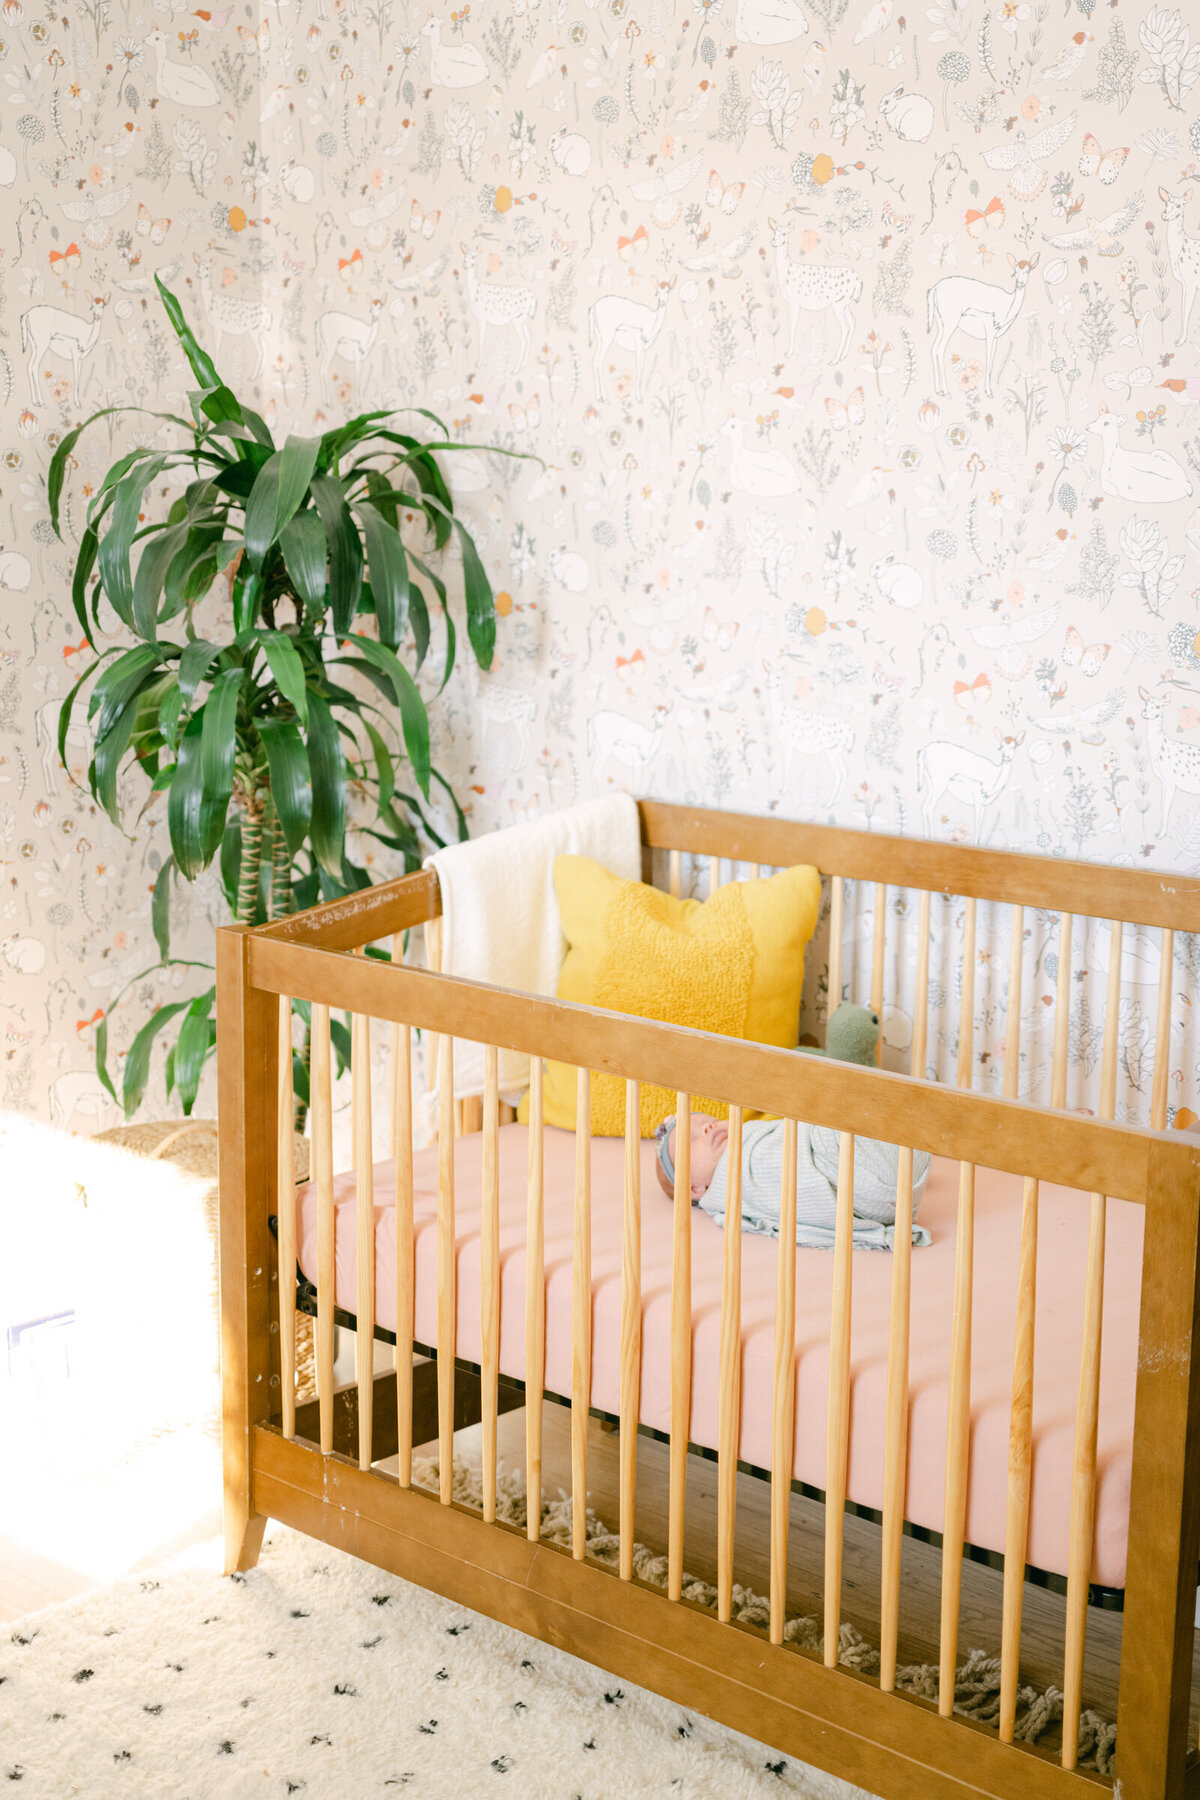 Newborn baby in sleeping in a woodland theme crib during a photoshoot